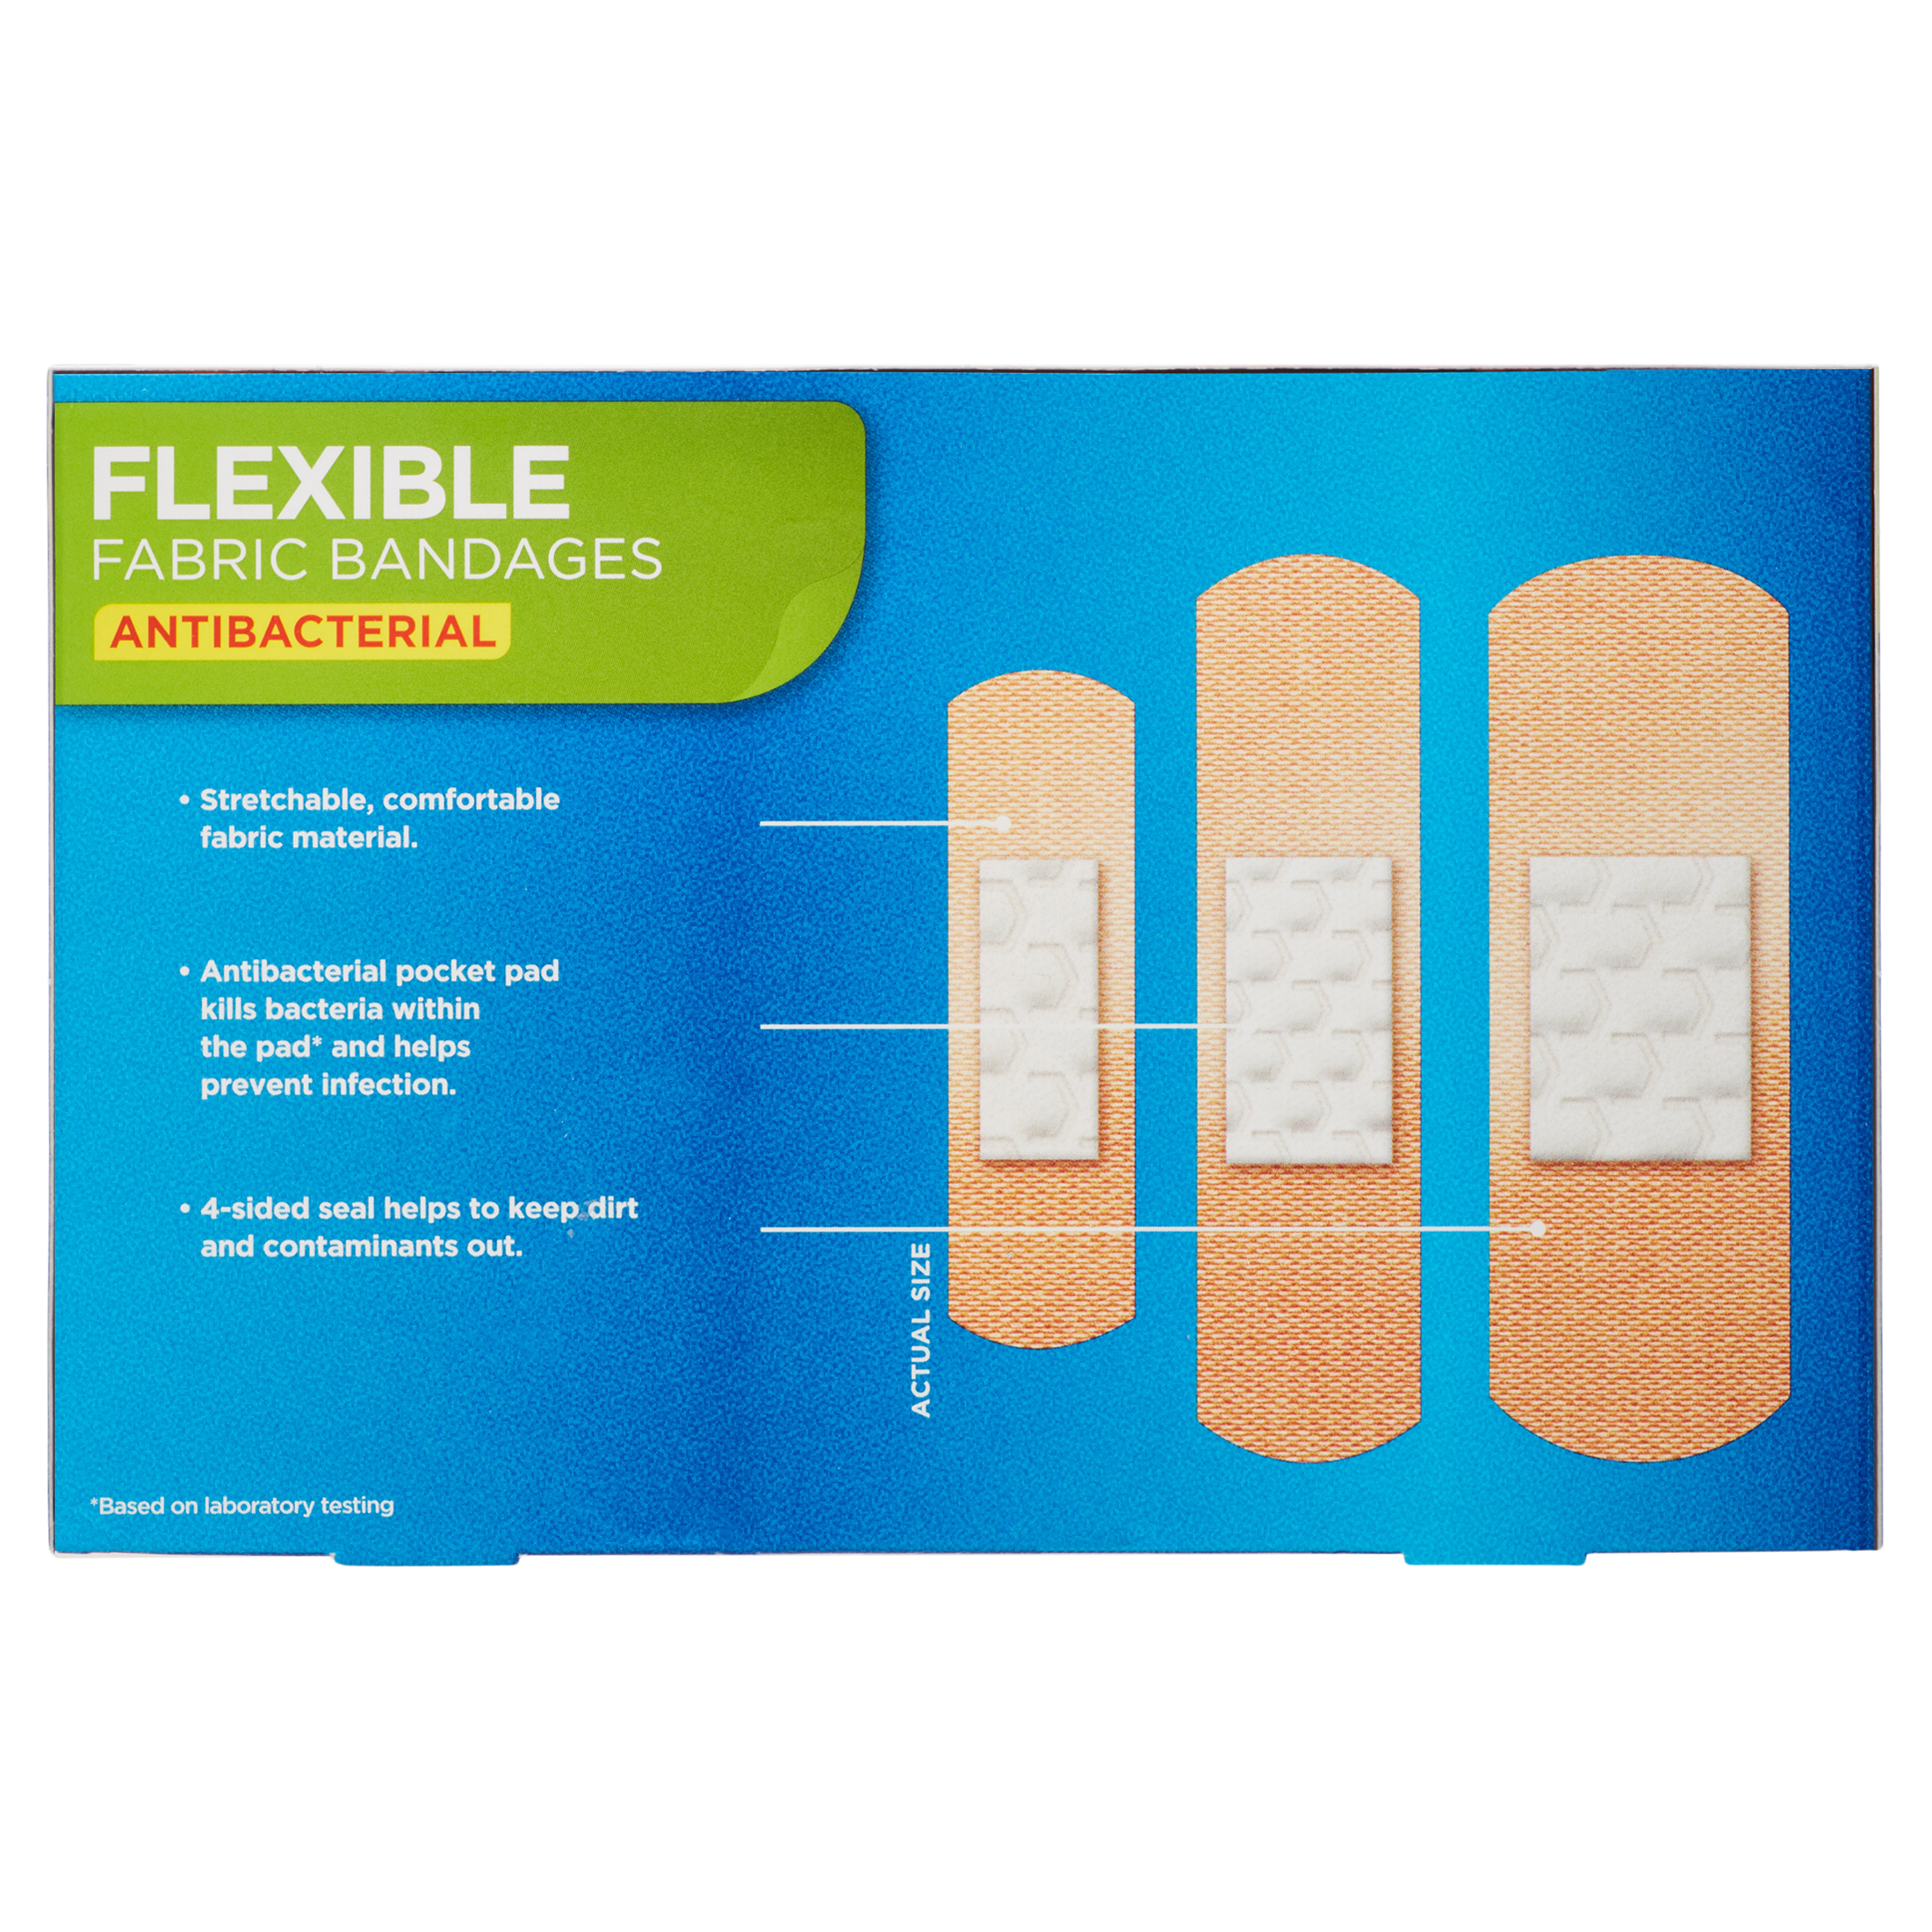 Equate Antibacterial Flexible Fabric Bandages, 100 Count - image 2 of 6